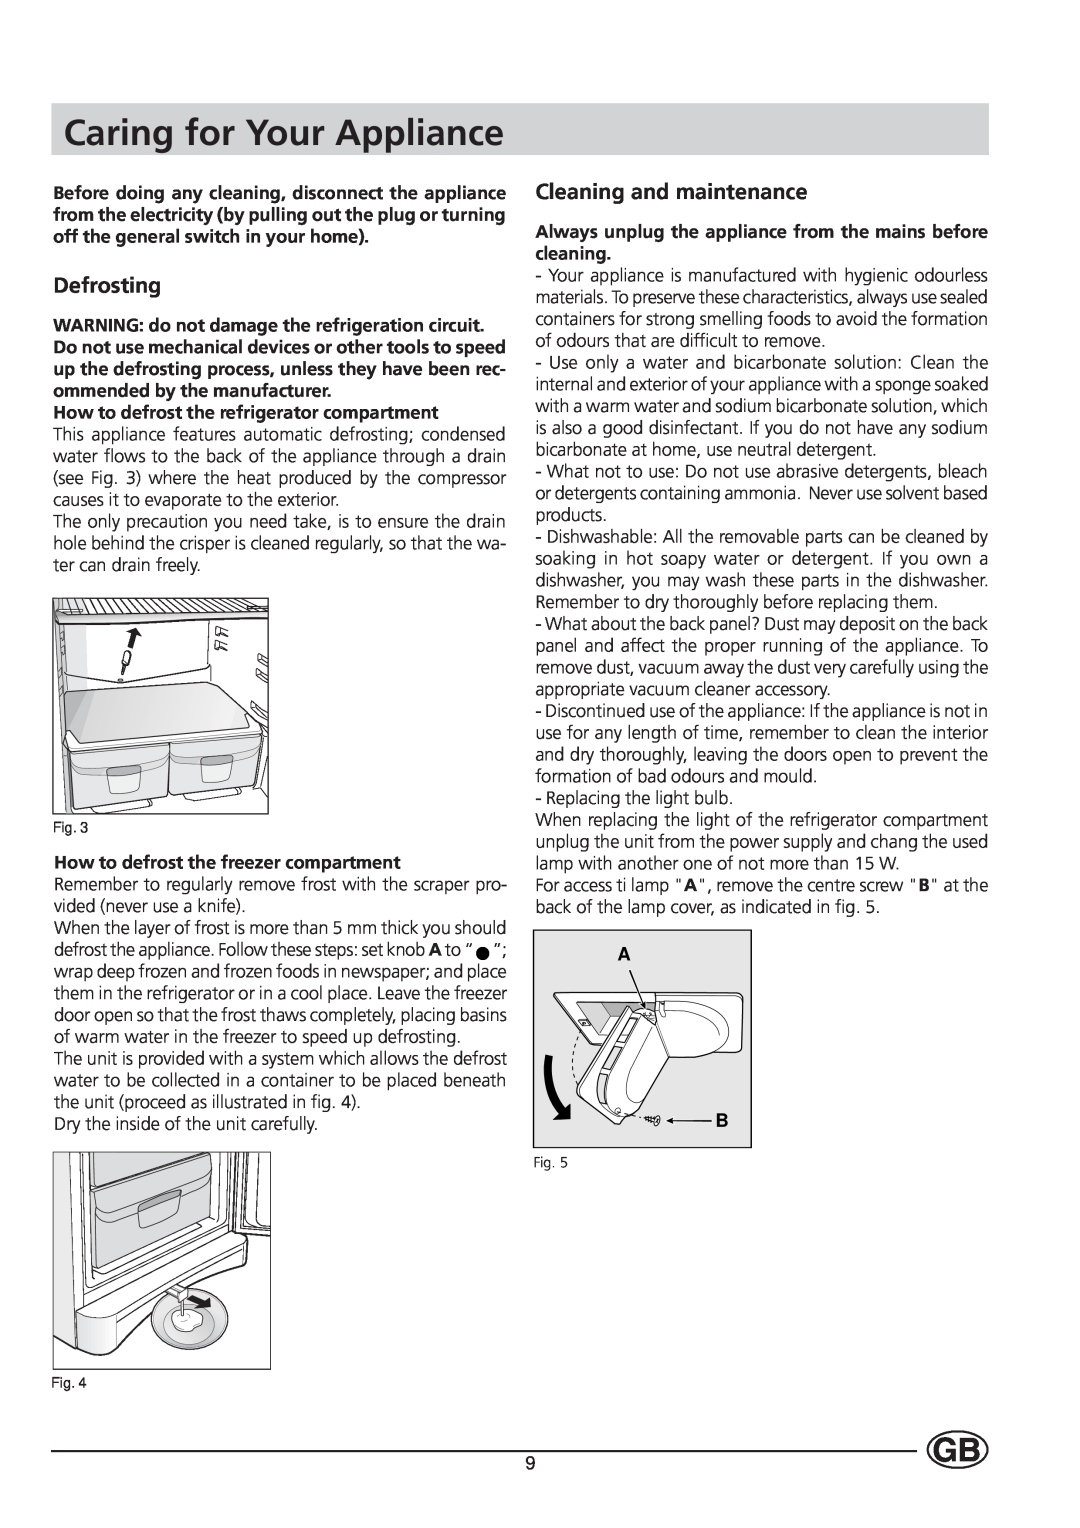 Indesit BA 139 S Caring for Your Appliance, Defrosting, Cleaning and maintenance, How to defrost the freezer compartment 